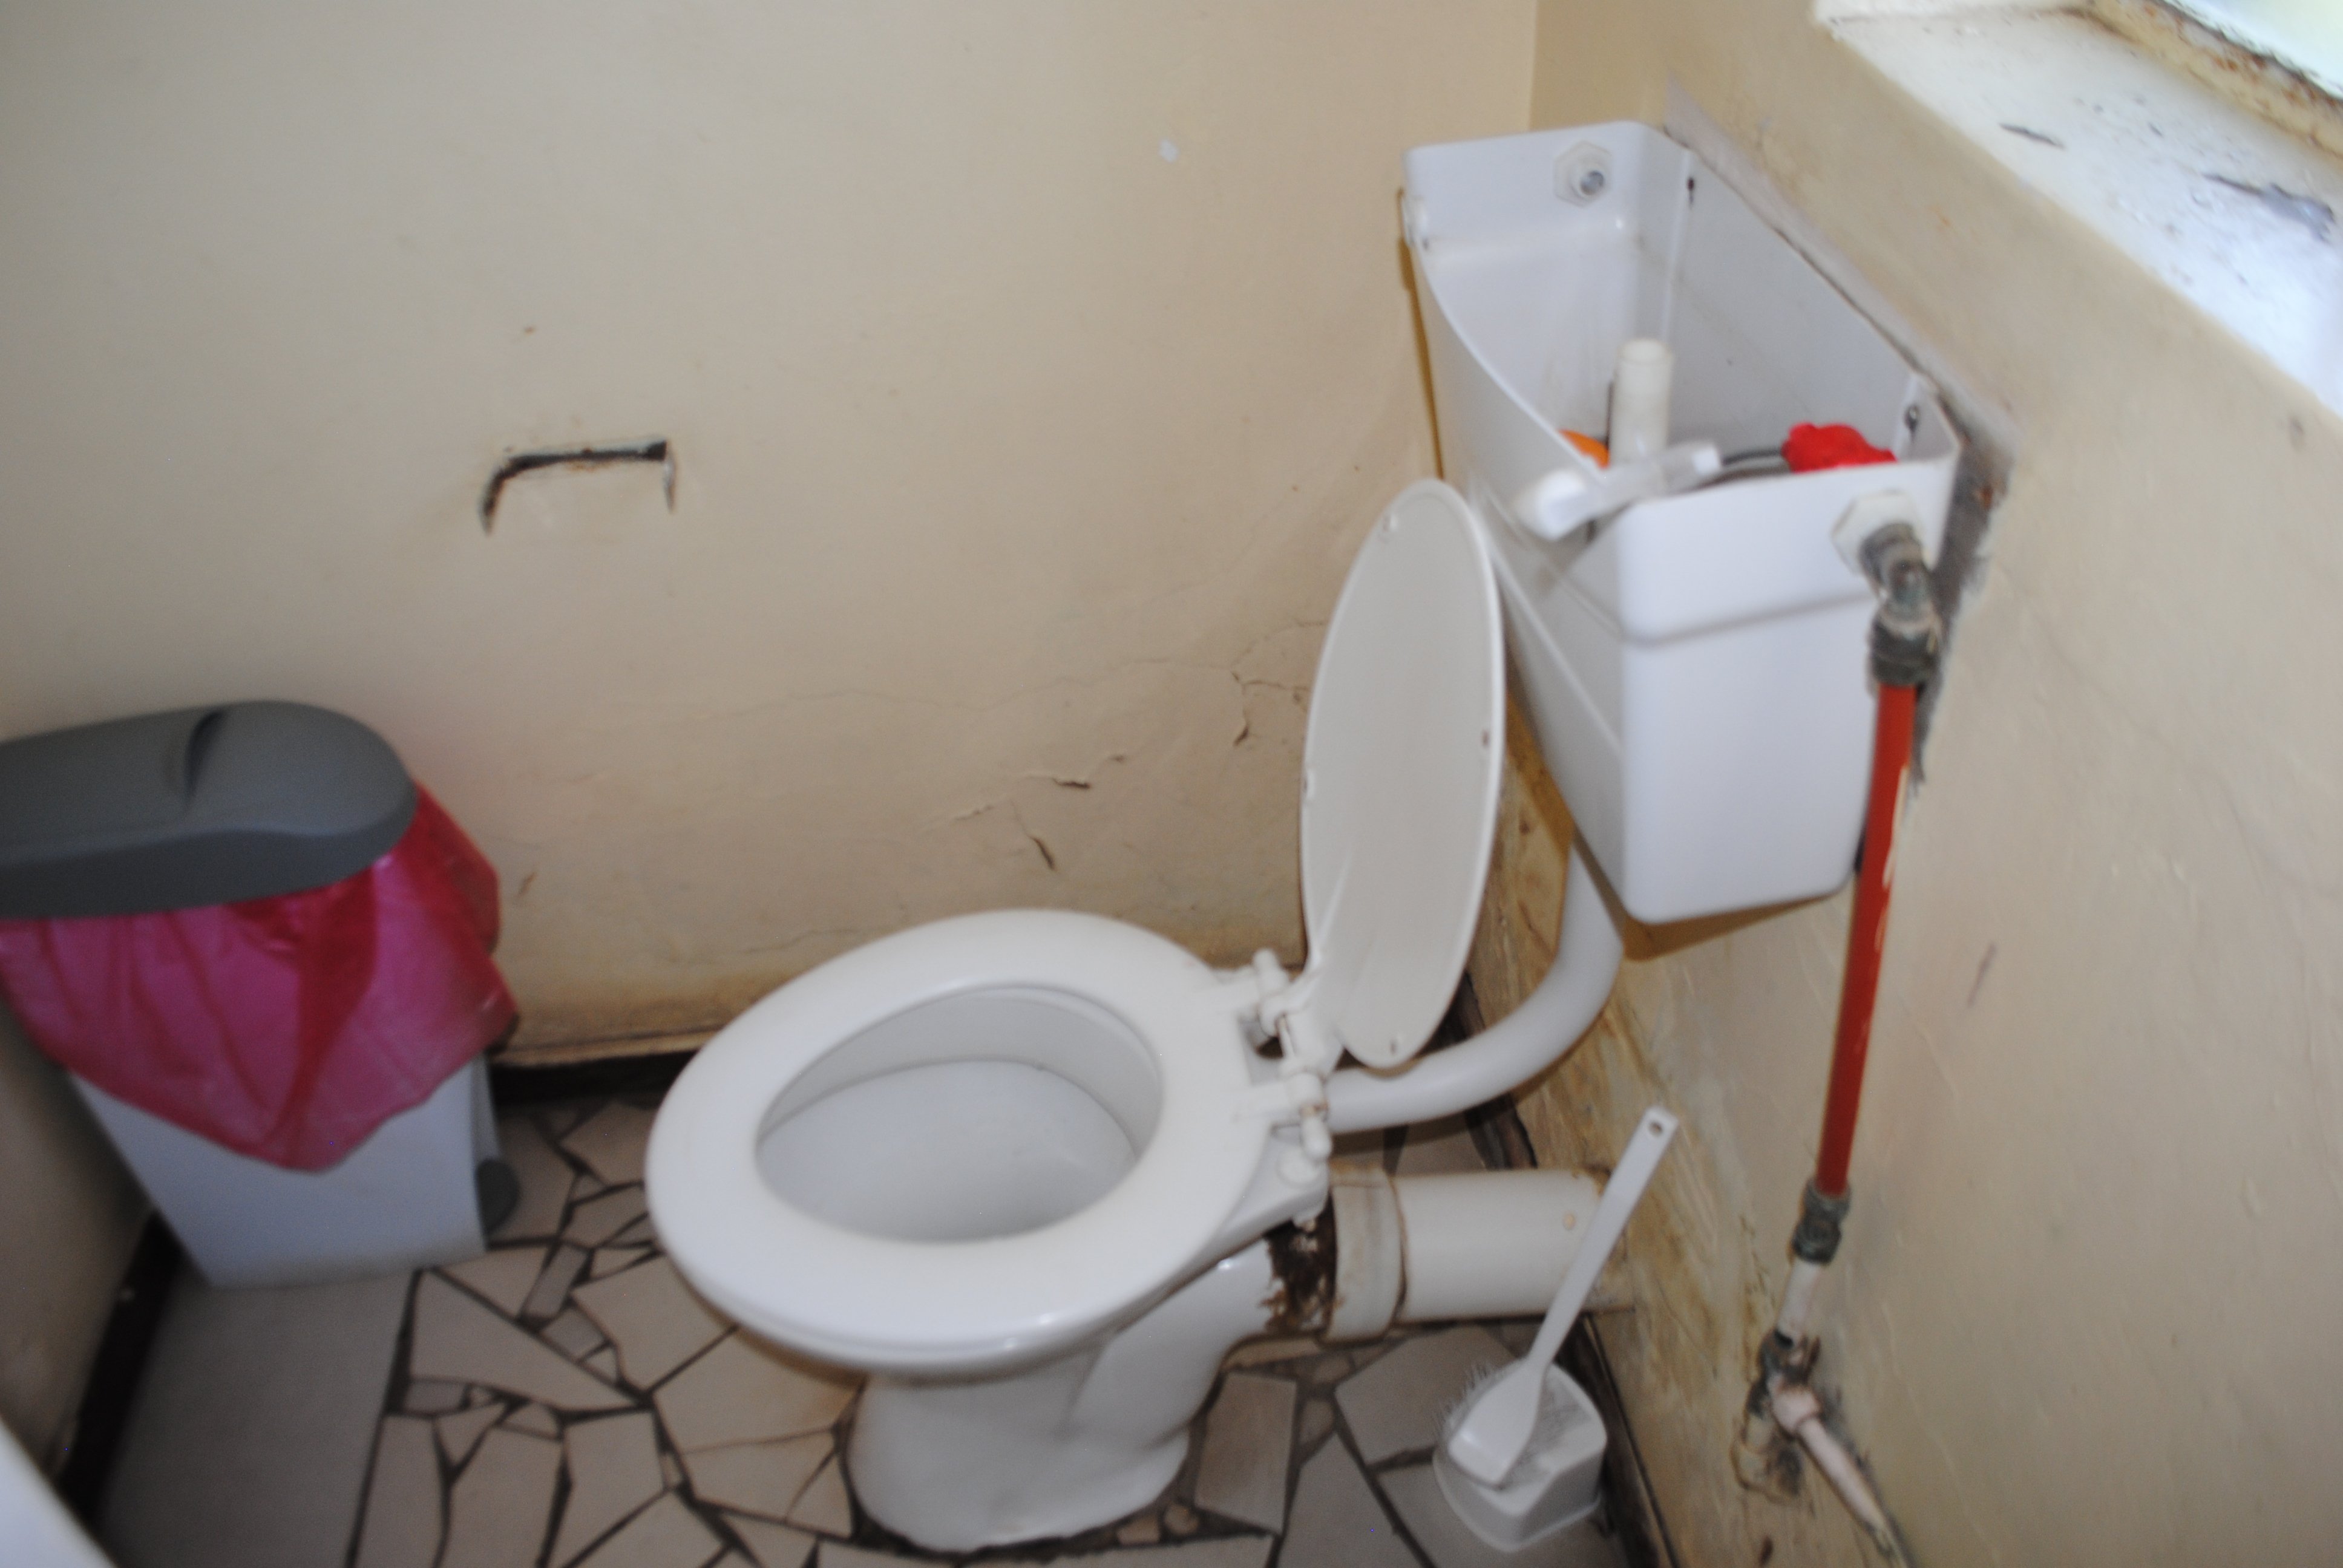 The only available toilet at Newtown clinic.